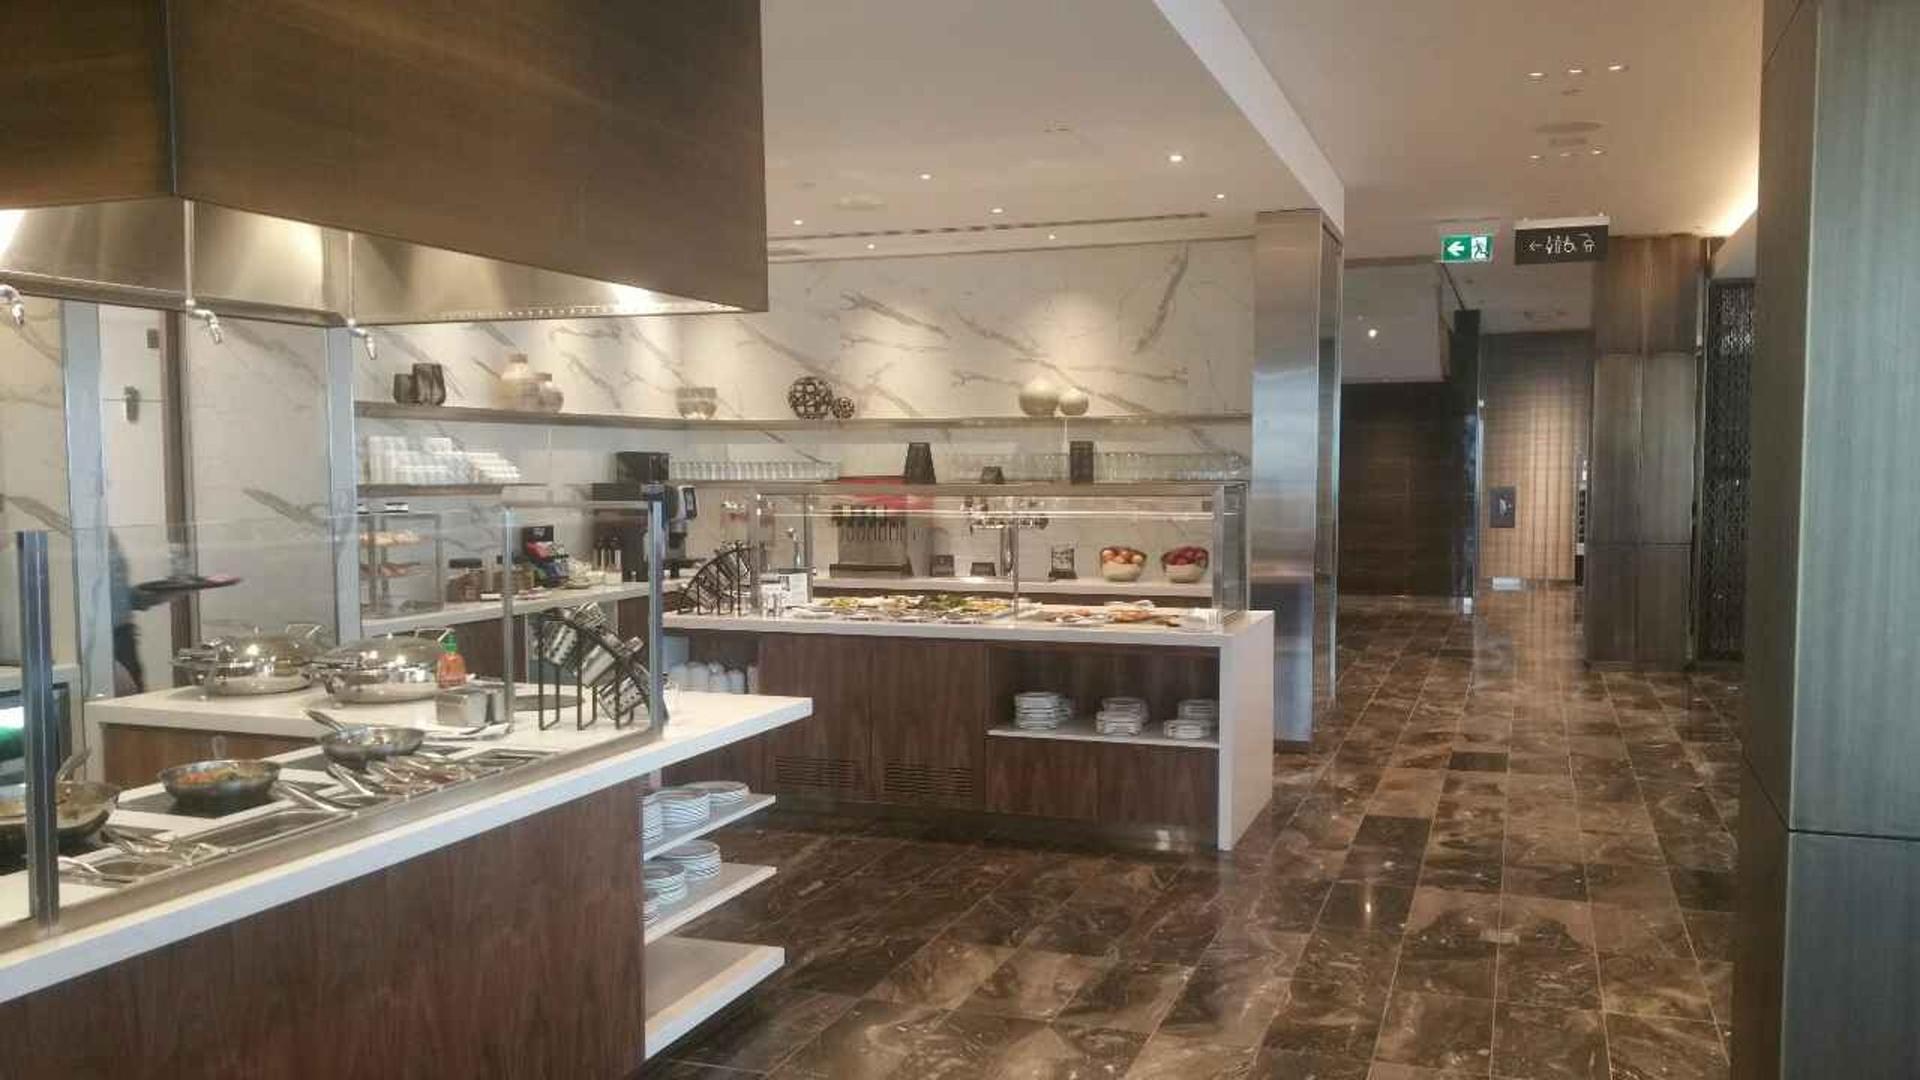 Air Canada Maple Leaf Lounge image 1 of 12